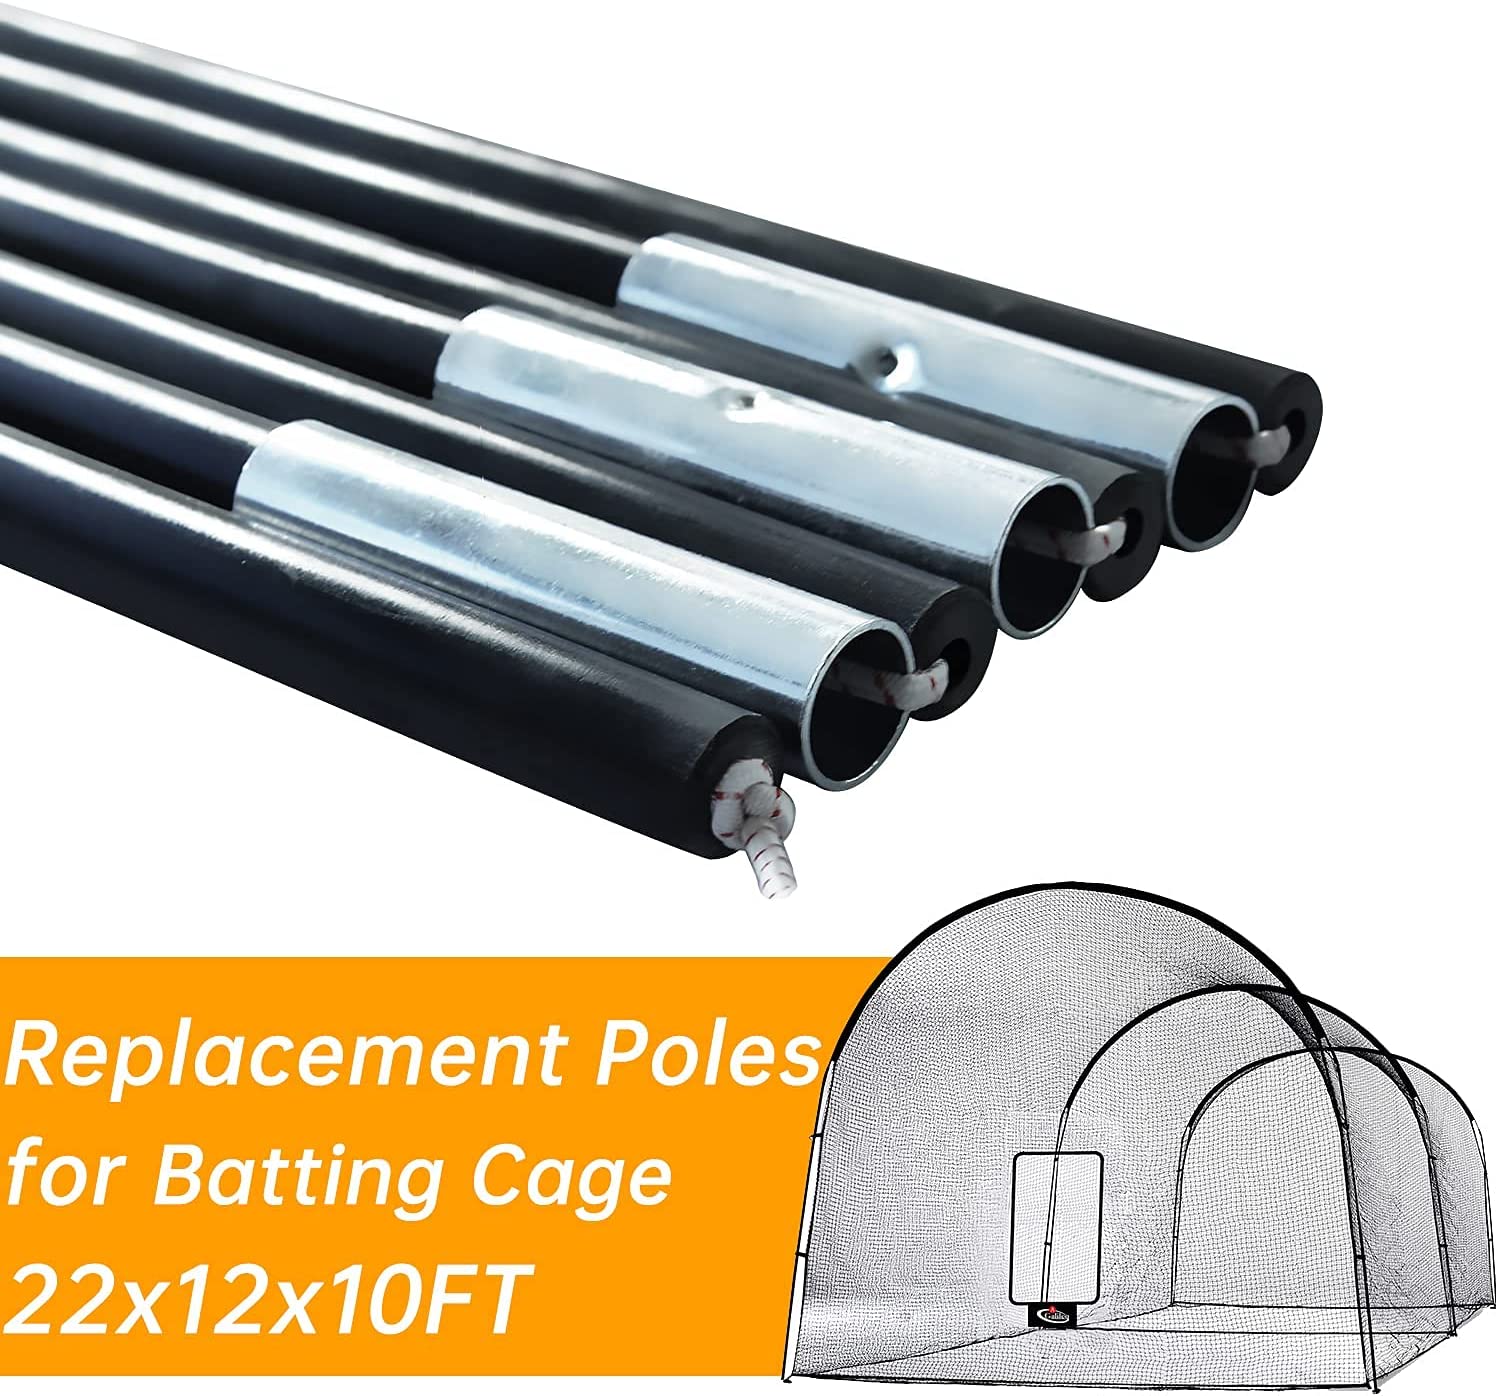 Gagalileo Poles Replacement, Replacement Rods for 22X12X10FT Baseball Batting Cage, Fiberglass Poles 2pcs, GB-0002P